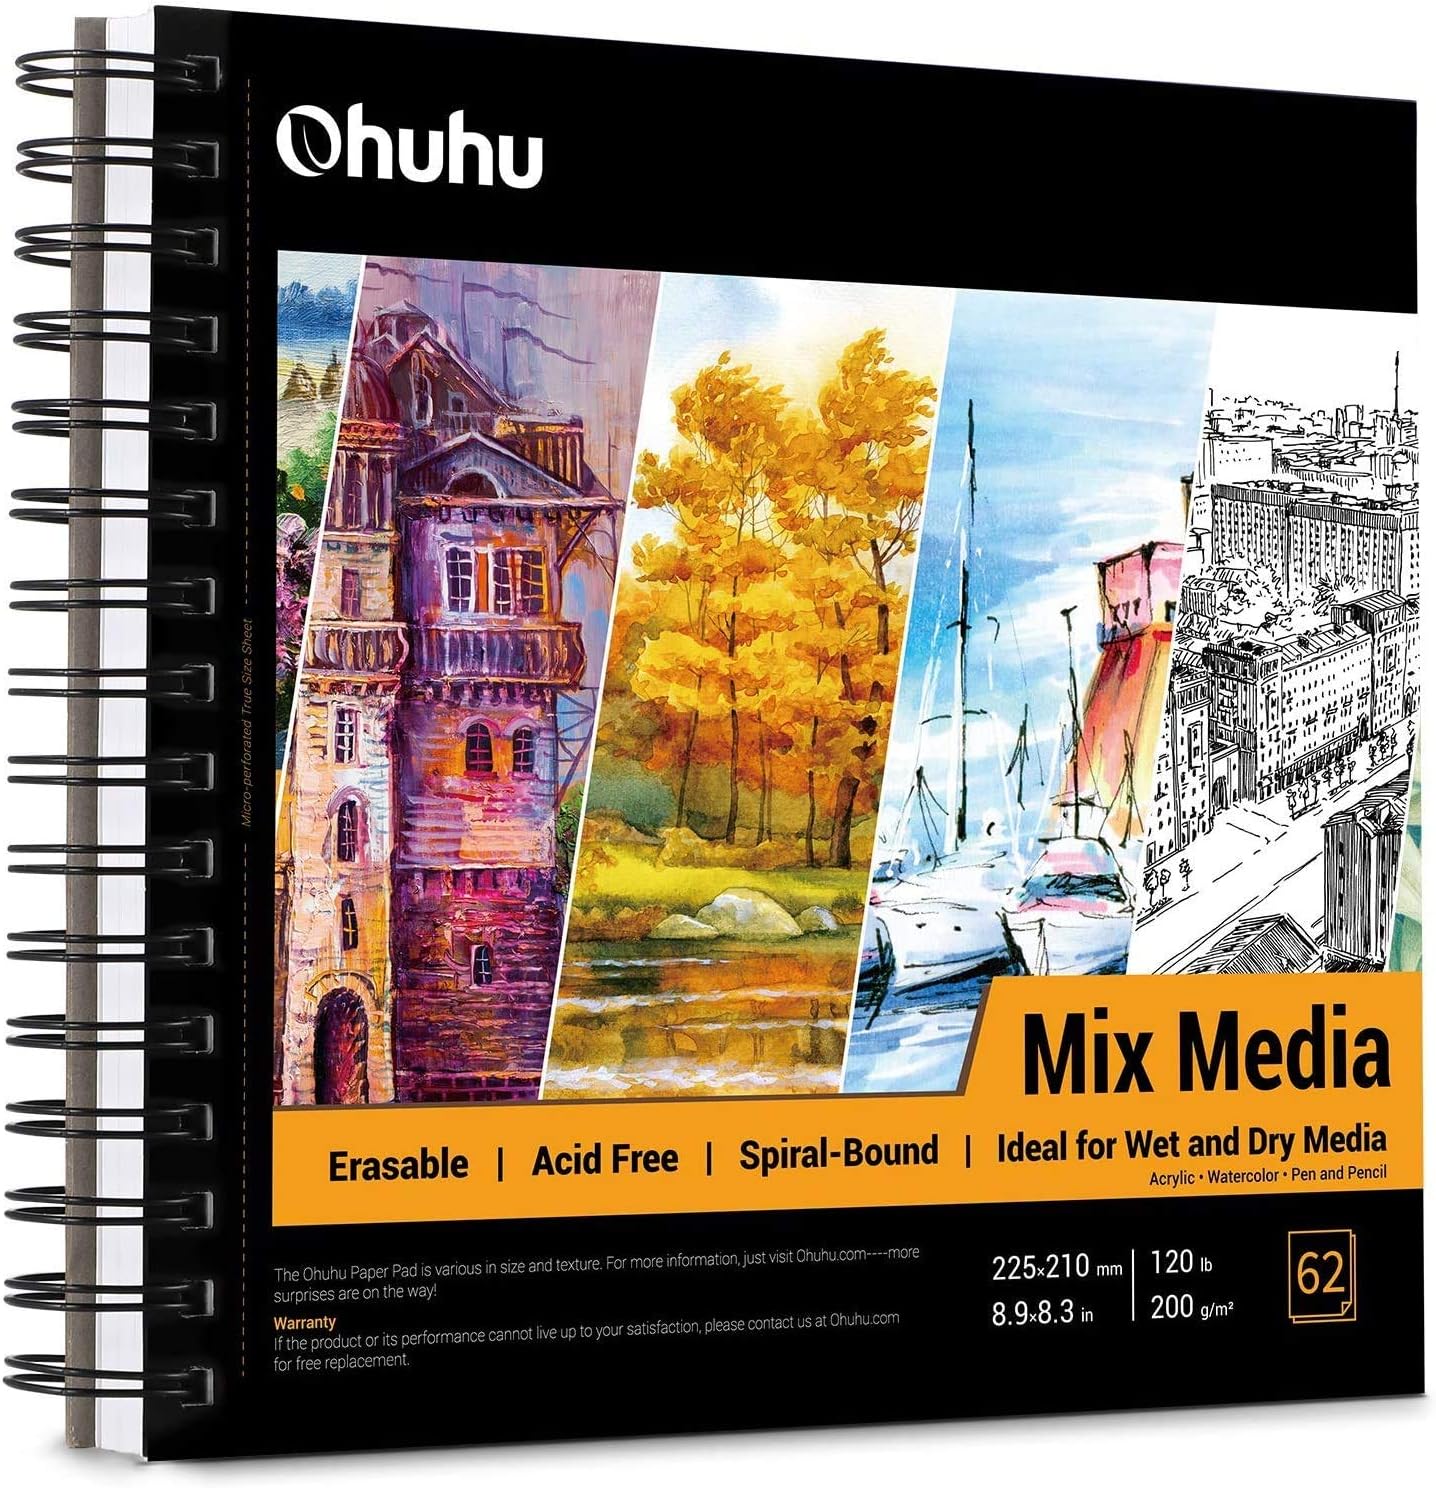 Ohuhu Mix Media Pad, Mixed Media Art Sketchbook, 120 LB/200 GSM Heavyweight Papers, Spiral Bound Mixed Media Paper Pad for Acrylic, Painting Christmas Gift